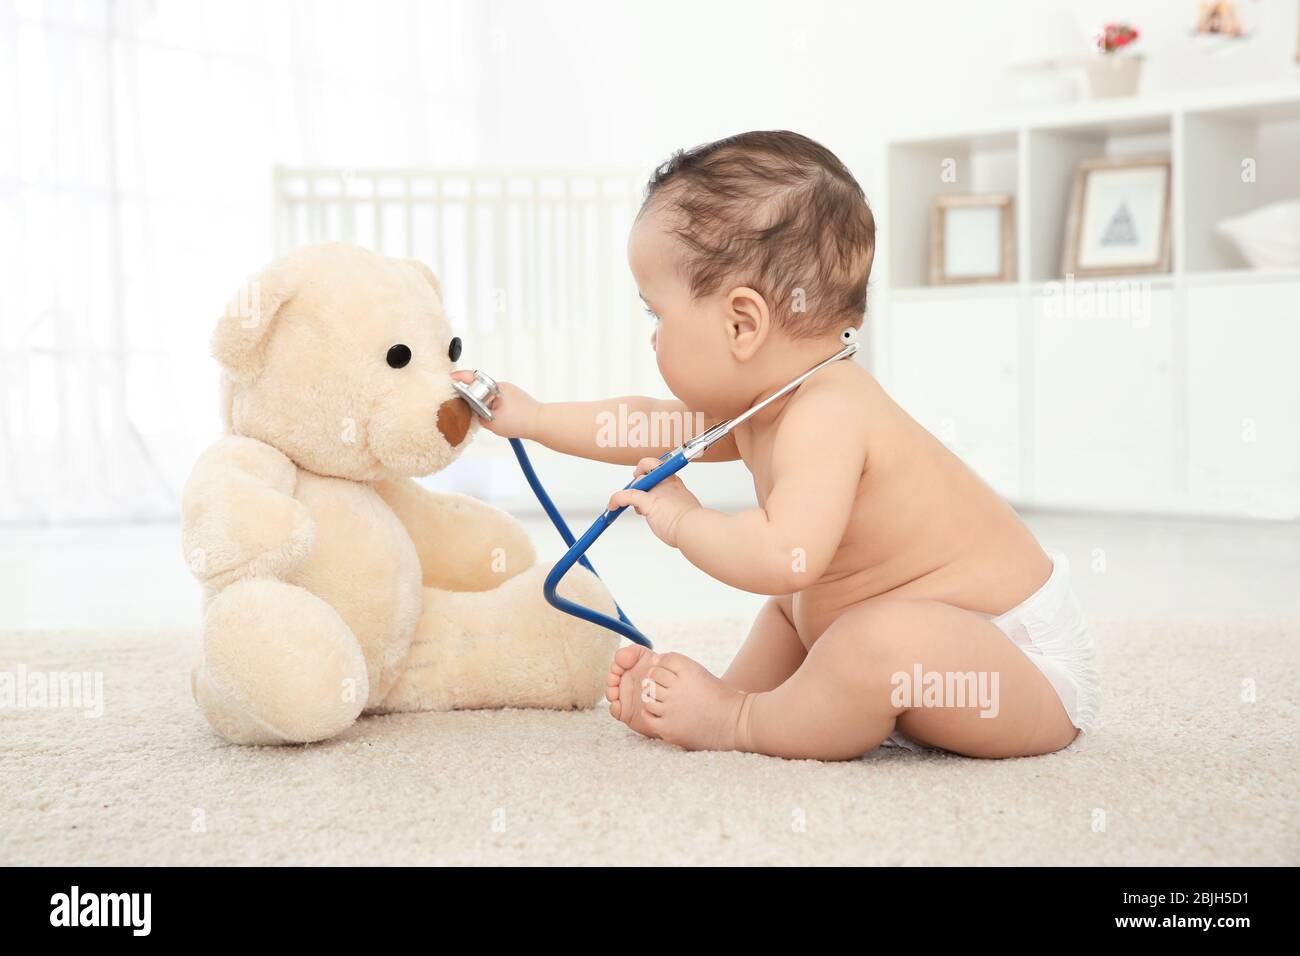 Cute little baby with stethoscope and toy bear playing at home ...